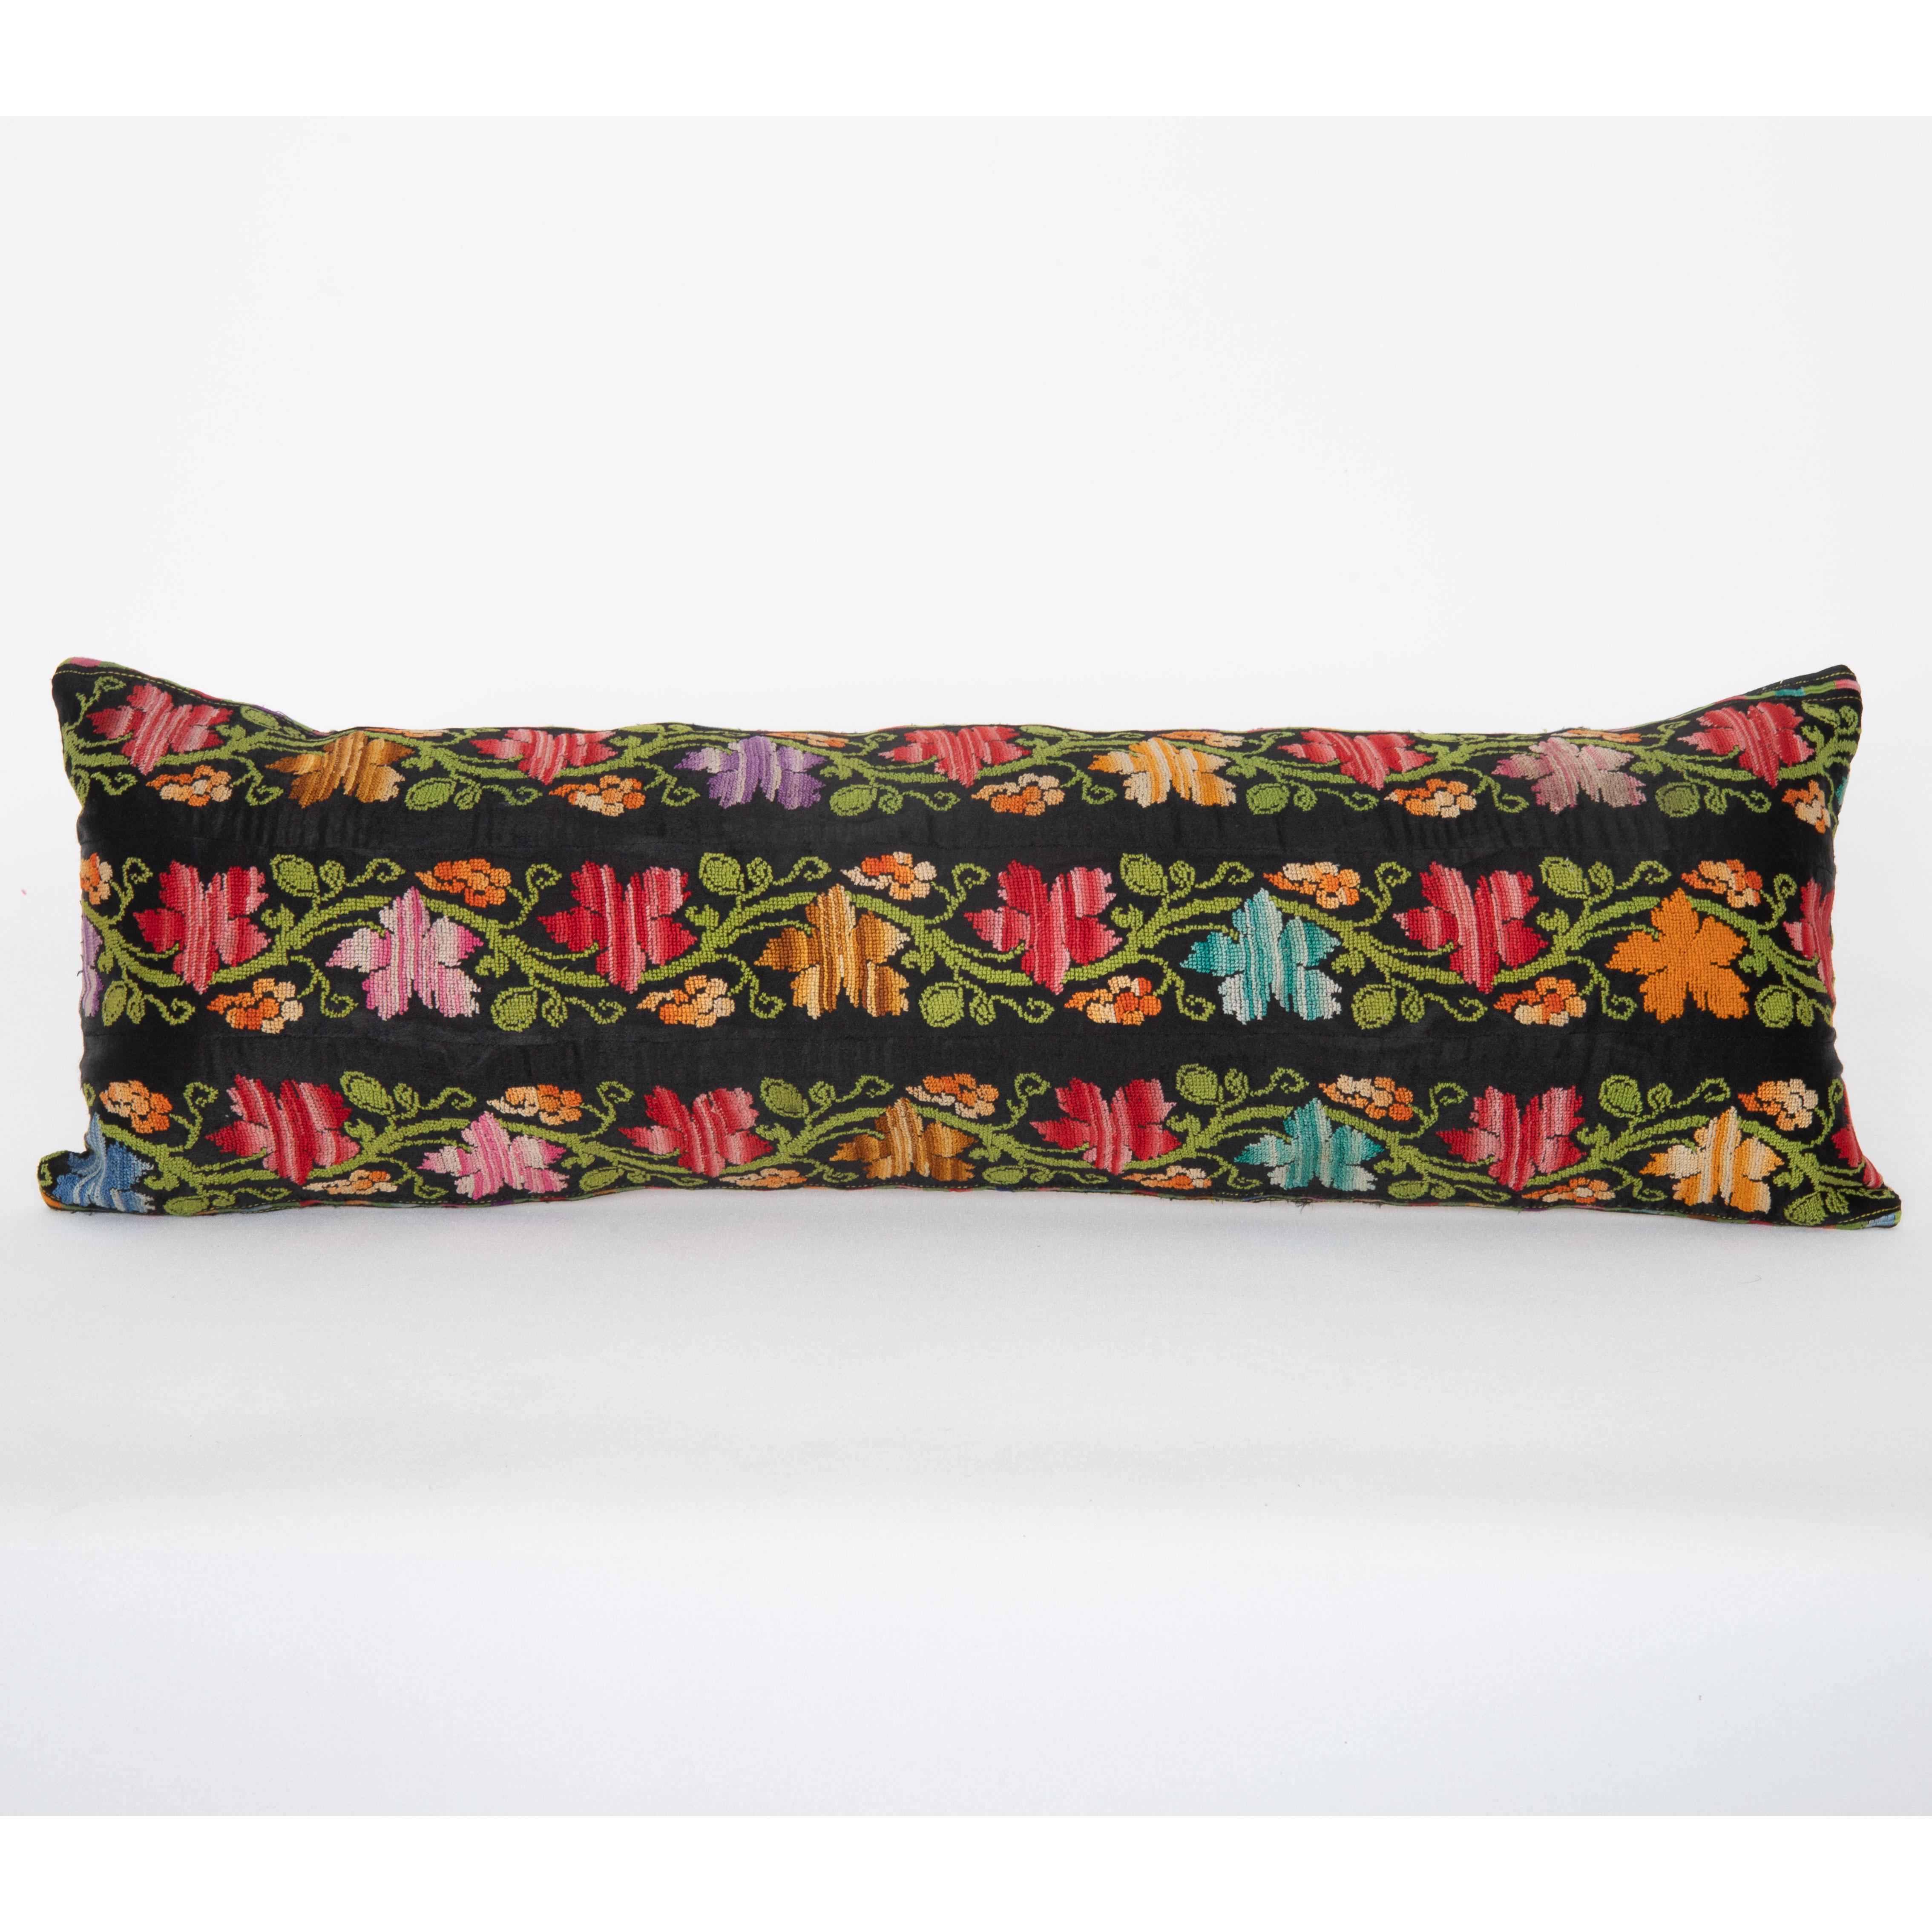 Embroidered Pillow Case Made From an E 20th C. Palestinian silk Embroidery For Sale